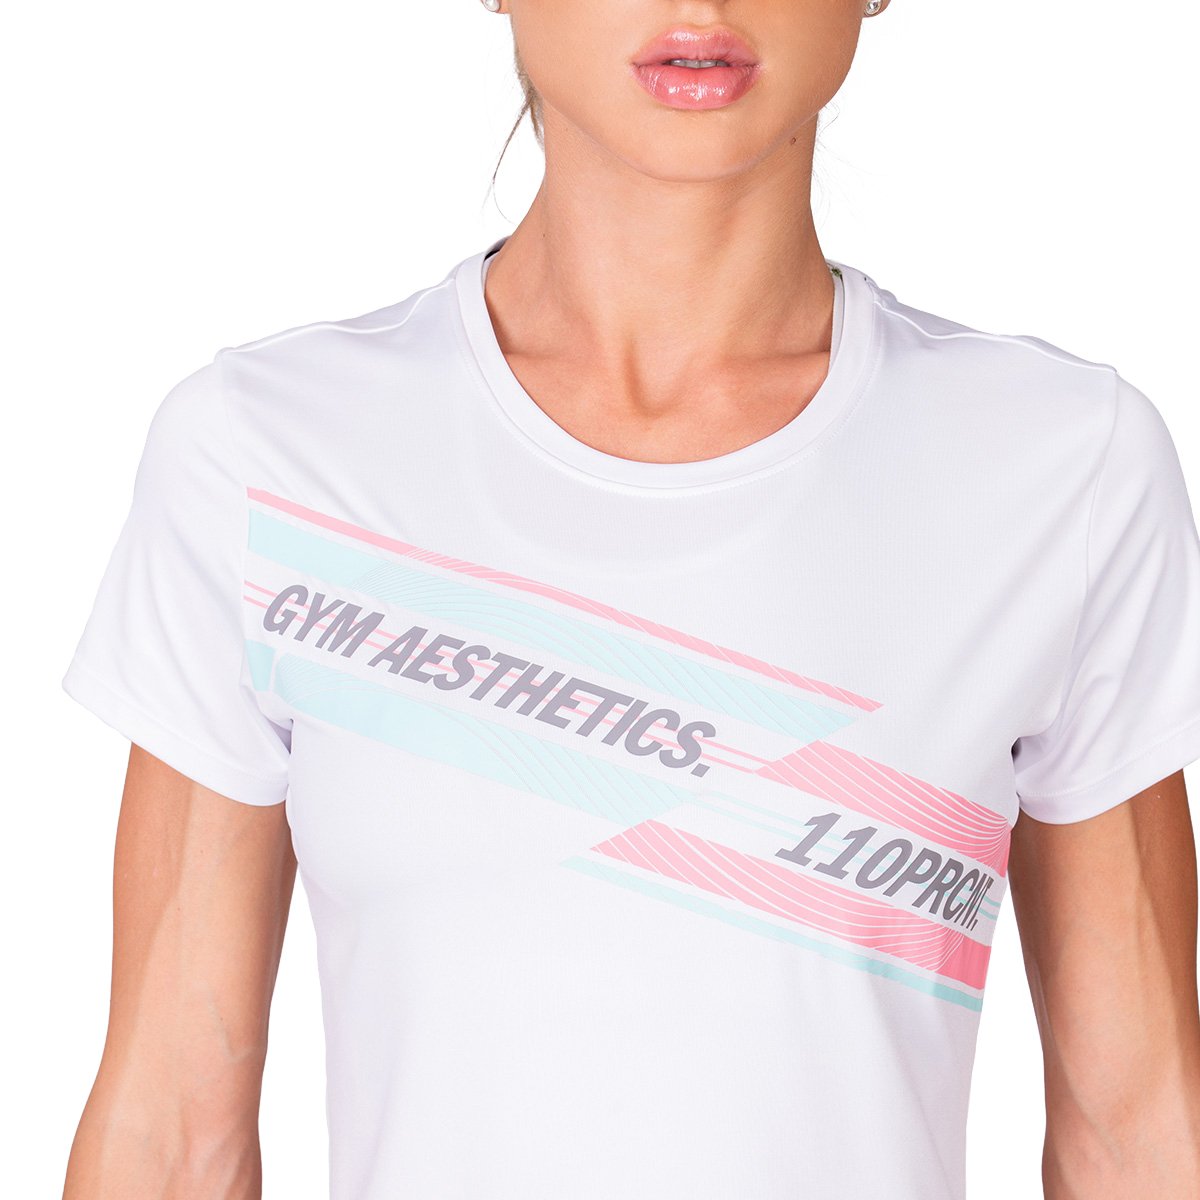 Activewear Cropped Fashion T Shirt for Women